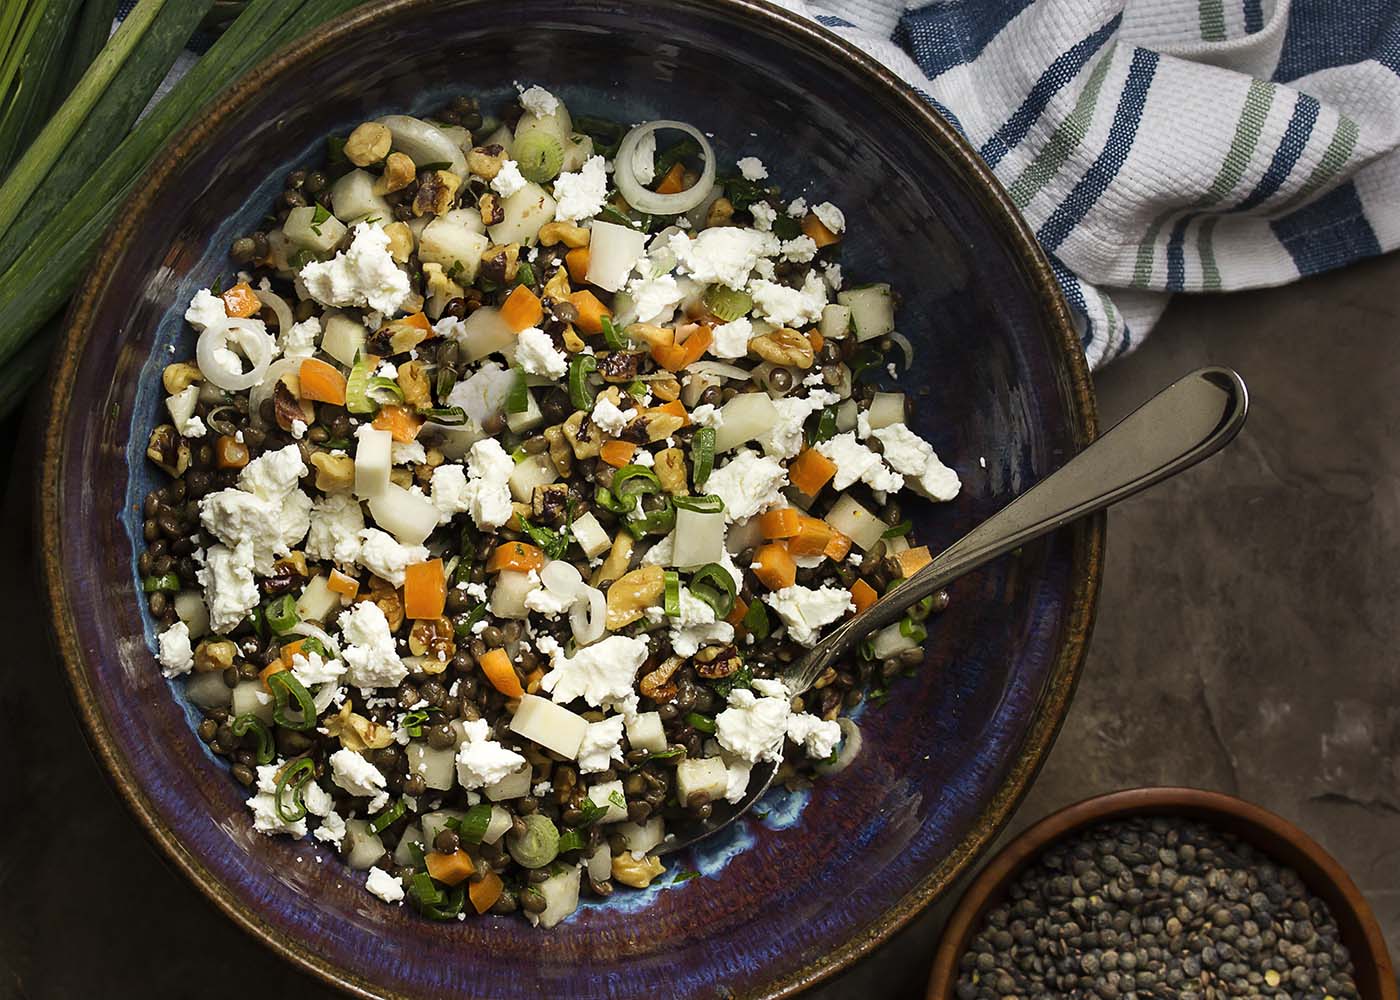 This cold French lentil and kohlrabi salad makes a great summer recipe! The spicy kohlrabi and earthy lentils are tossed with carrots and goat cheese for a tasty weeknight side dish. Healthy, easy, and quick! | justalittlebitofbacon.com